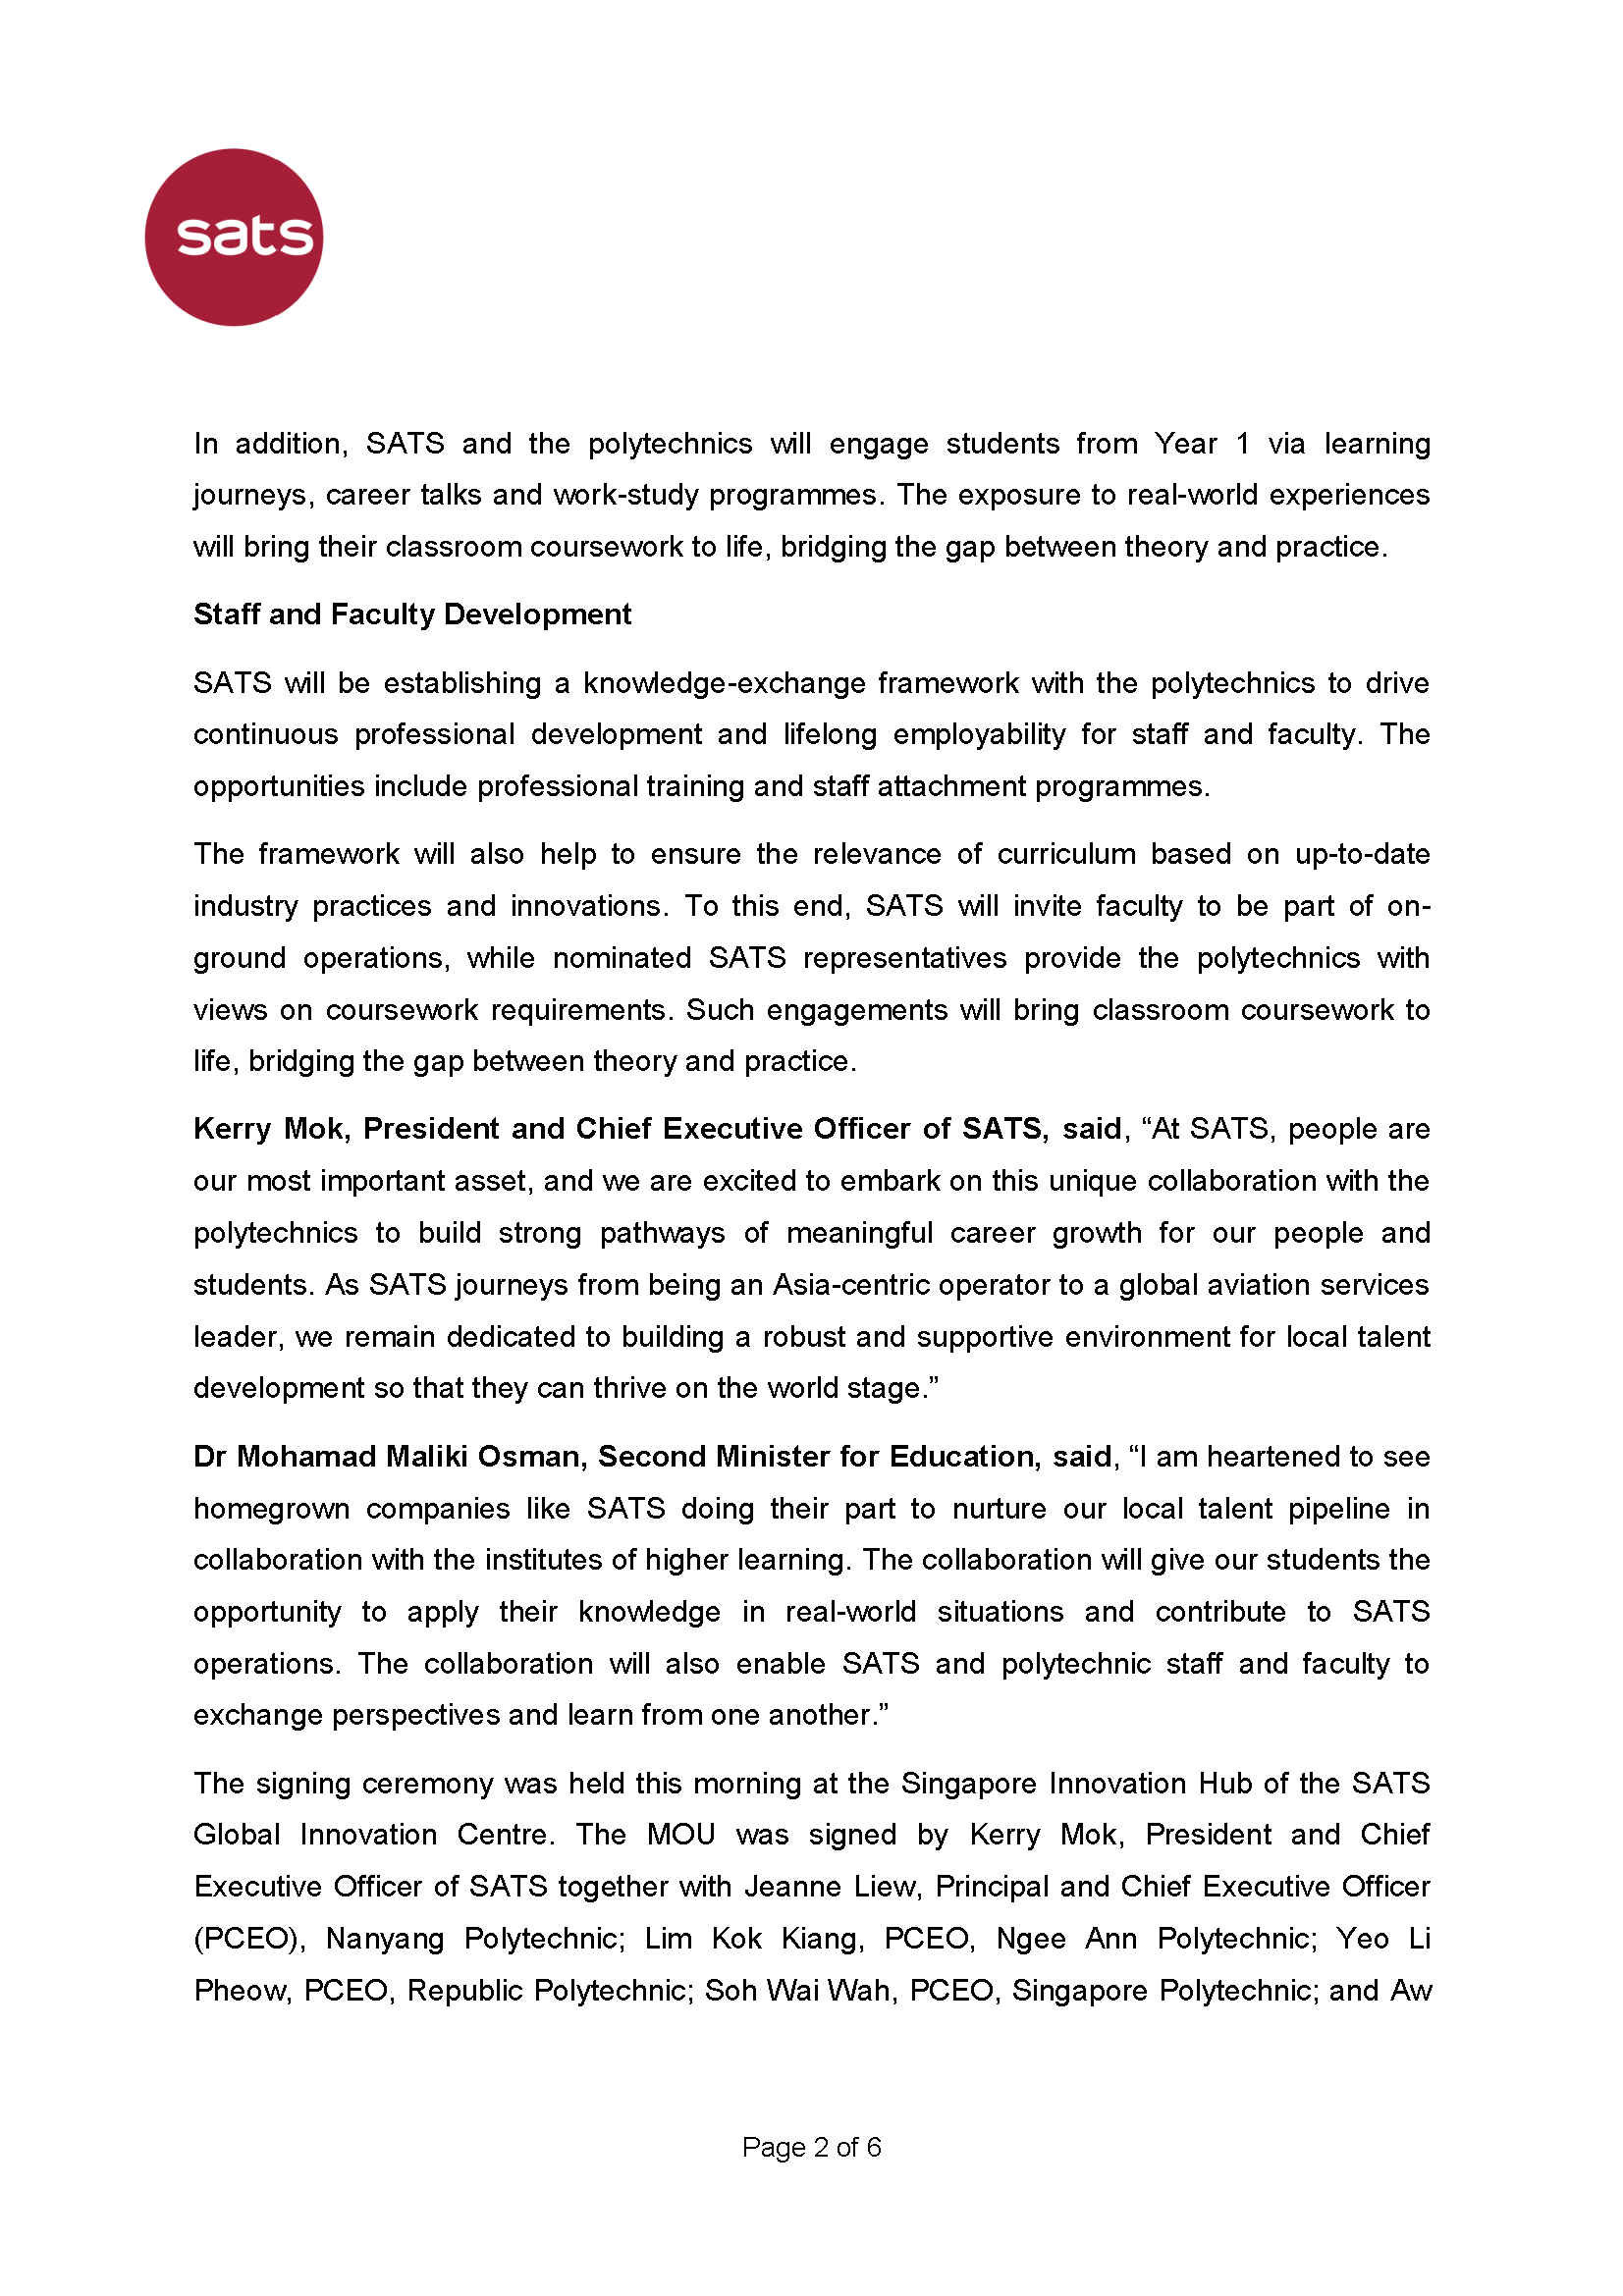 20230206_1200 SATS Media Release on MOU with Polytechnics_forPolytechnics_Page_2